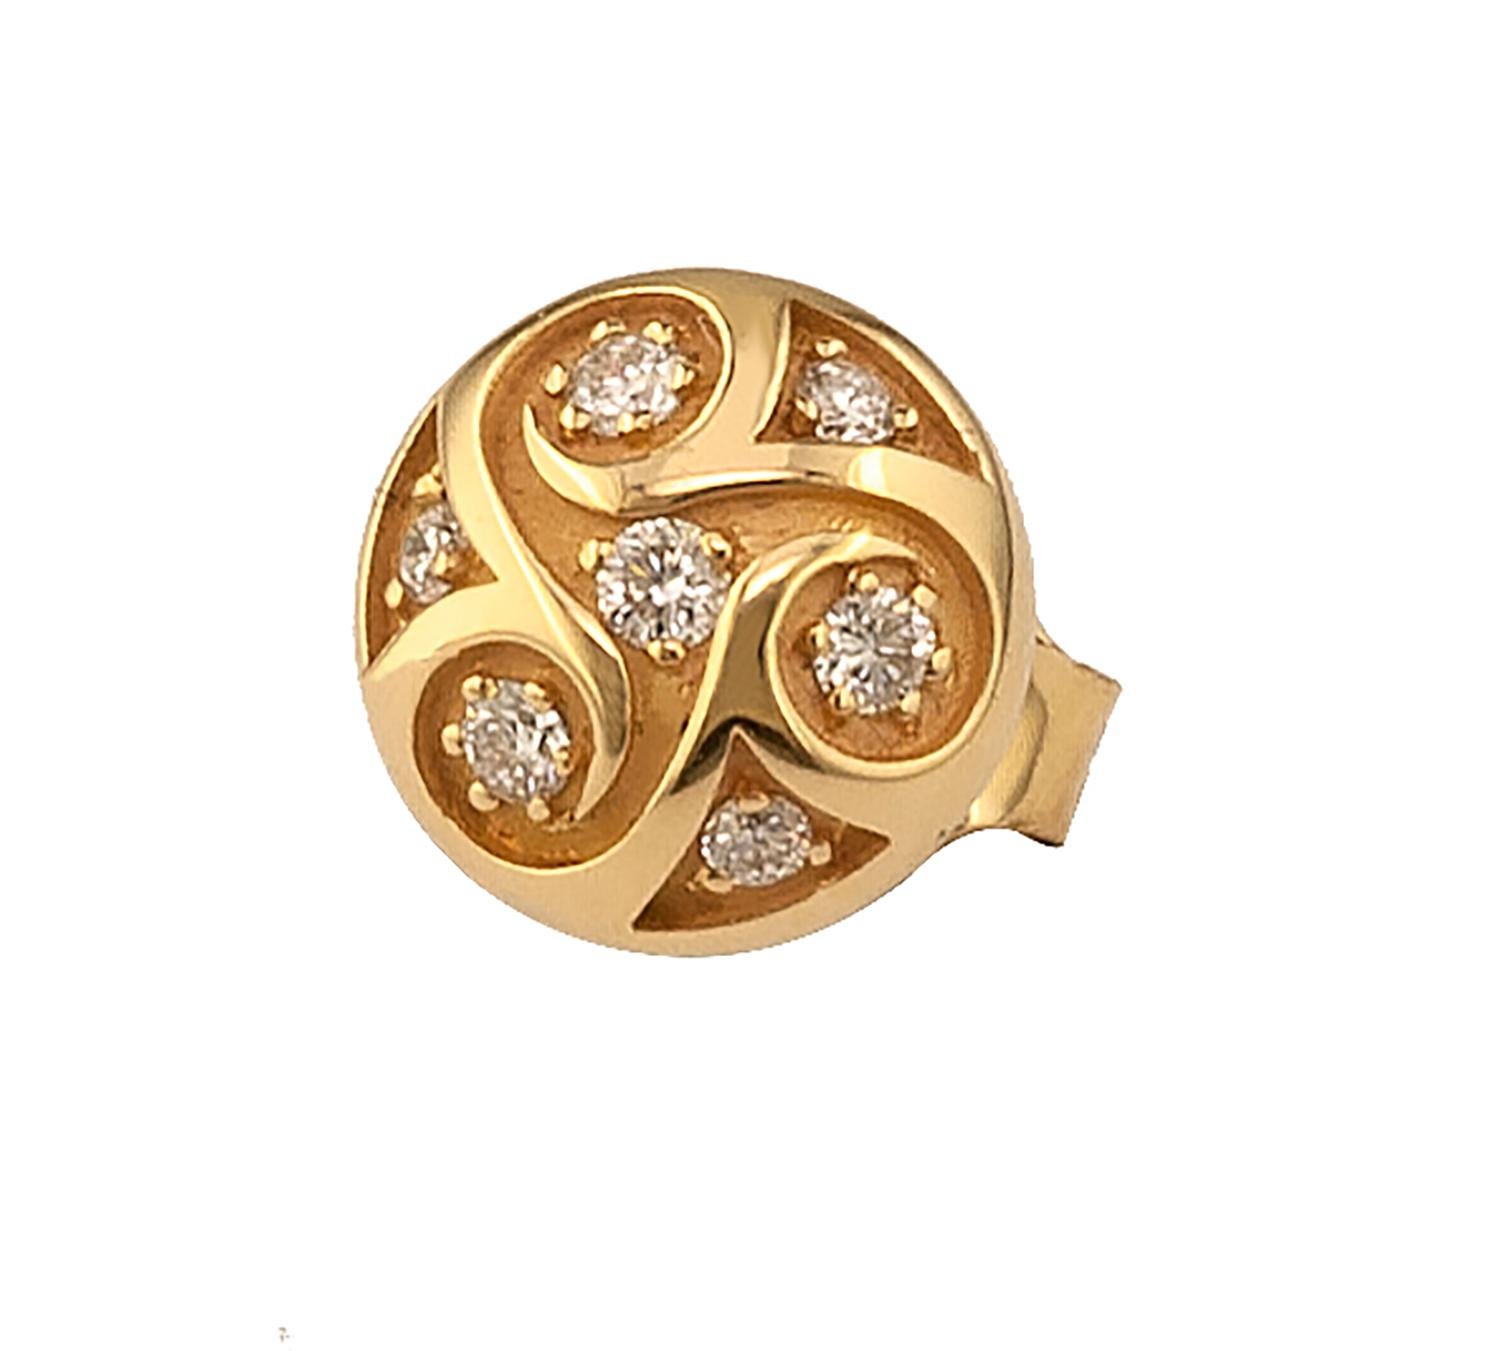 These S.Georgios designer round stud Earrings are 18 Karat yellow gold and microscopically carved by hand and finished with a unique velvet background look. These beautiful round stud earrings feature 14 brilliant-cut White Diamonds total weight